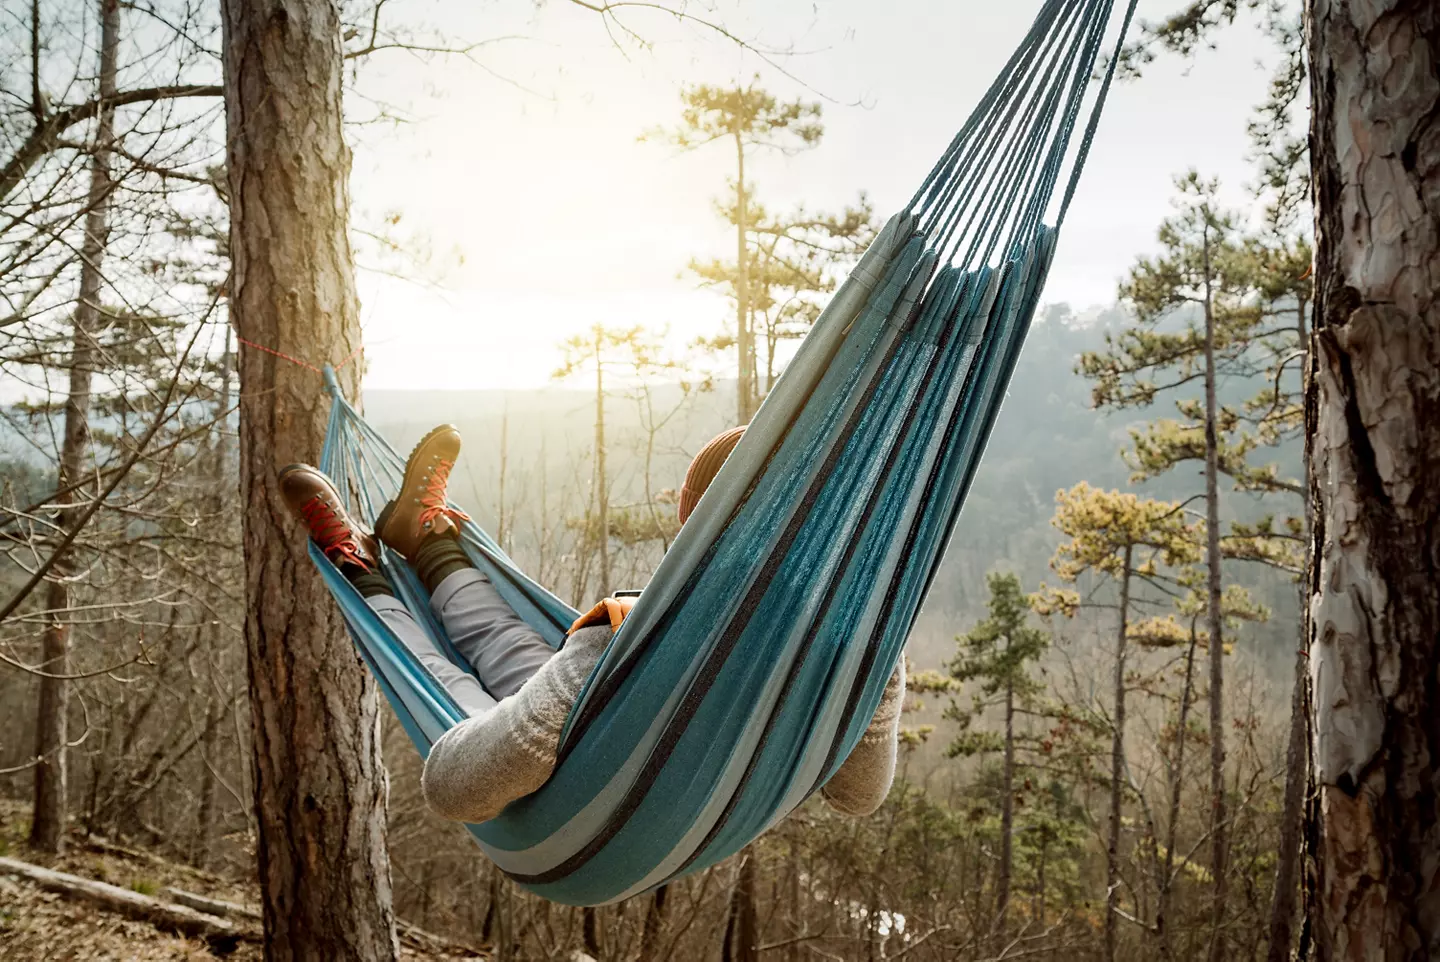 Camper enjoying the view from a hammock.